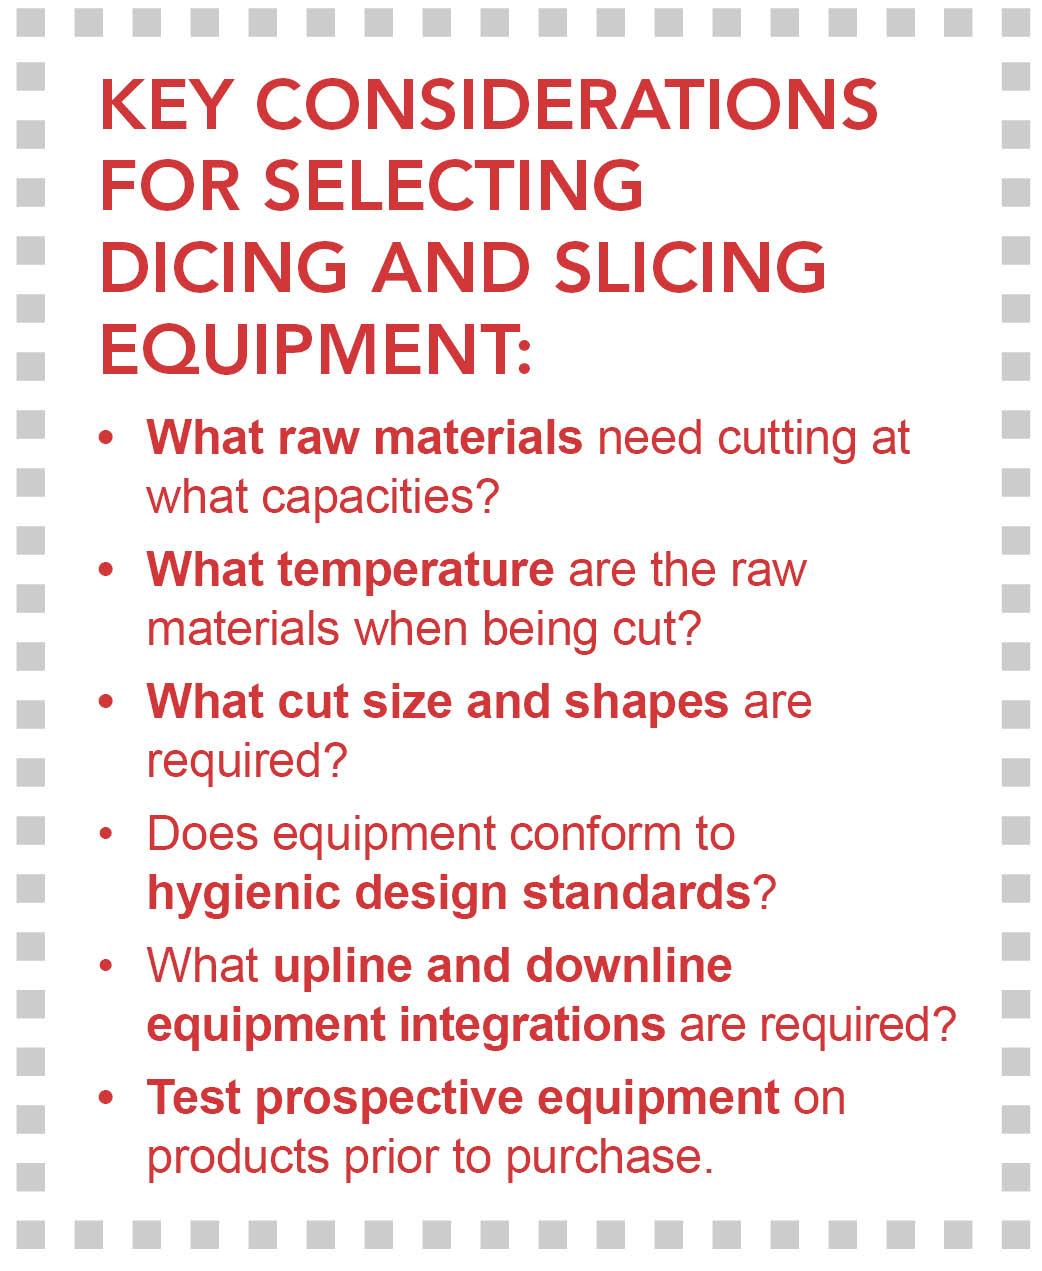 Key considerations for selecting dicing and slicing equipment